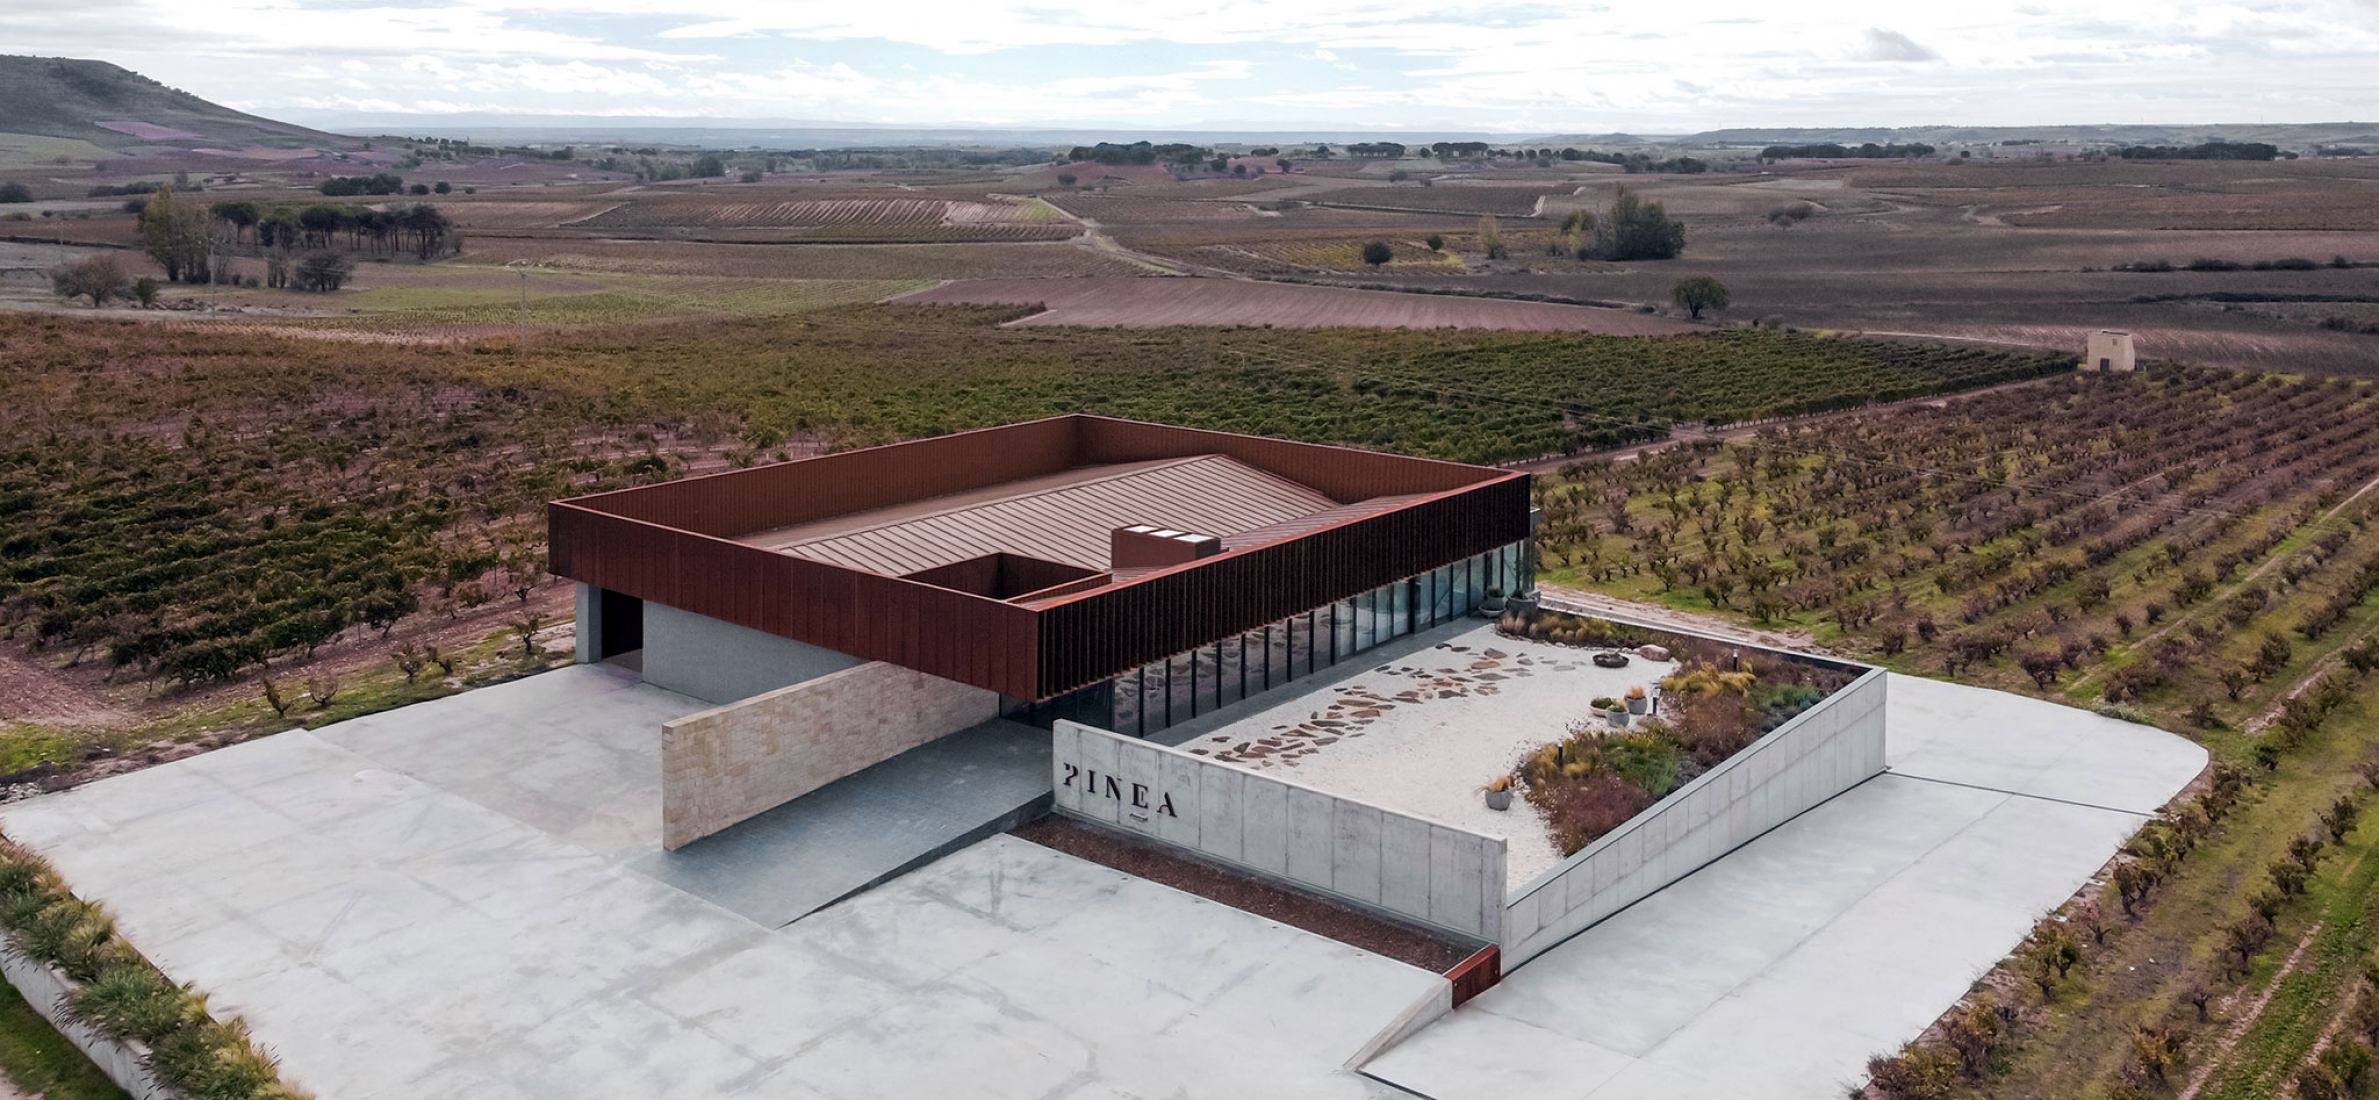 Wine cellar extension for PINEA WINE by Arias Garrido Arquitectos. Photograph by Ruheca.